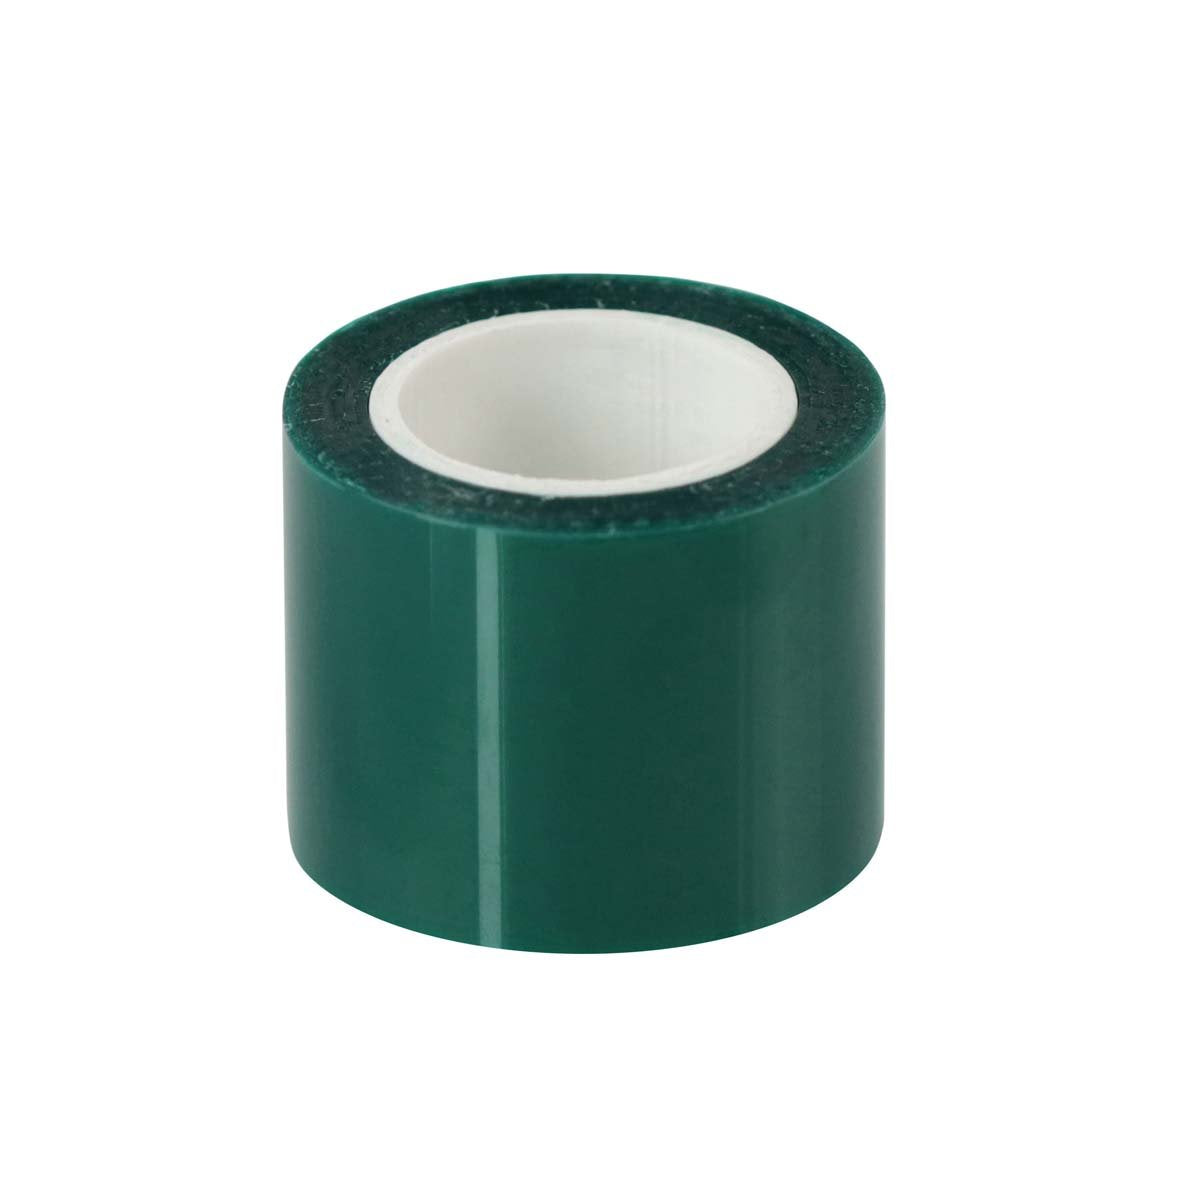 Caffélatex Tubeless Tape z adhesive tape for tubeless conversion